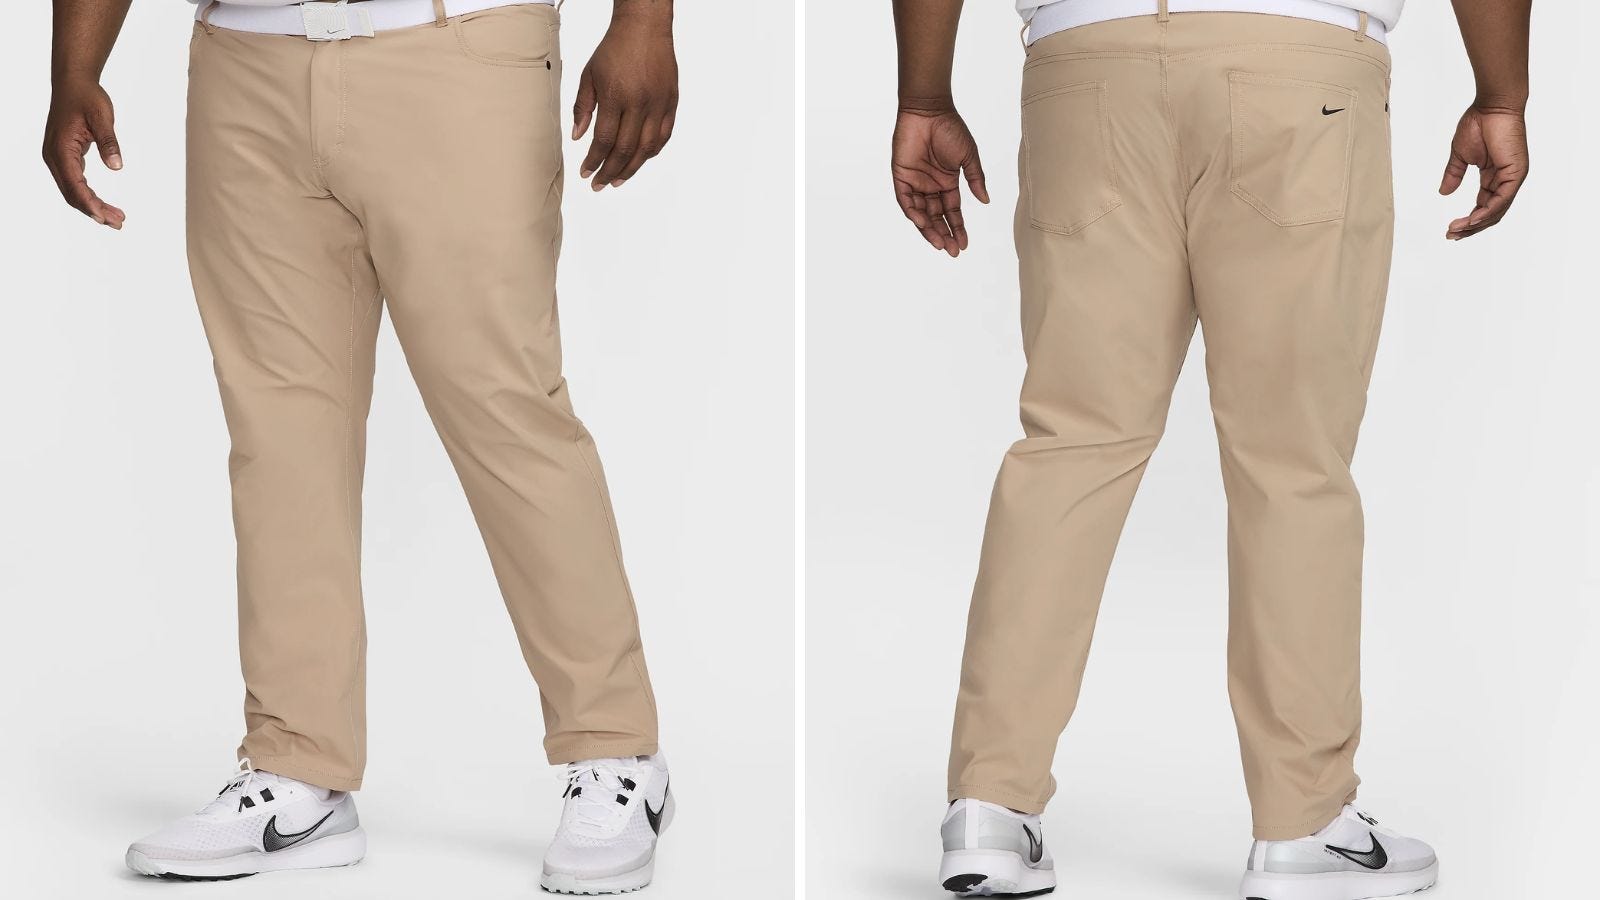 side by side image of the lower half of a man in tan golf pants from the front (on the left) and the back (on the right), included in a roundup of Nike picks from PGA player Tony Finau